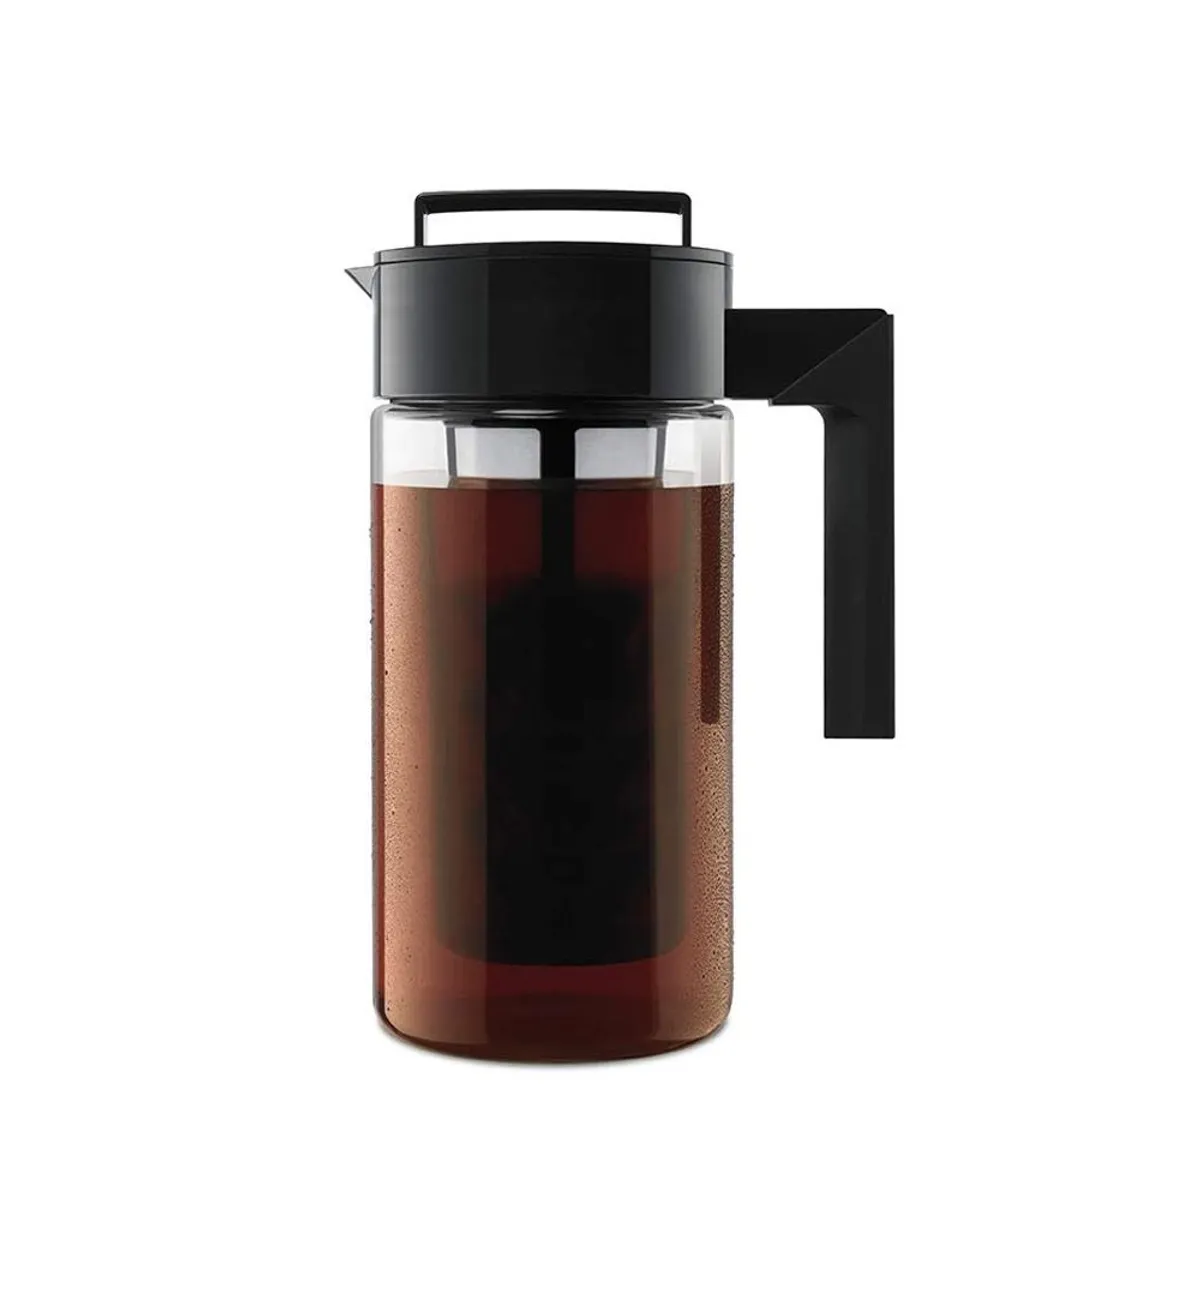 Takeya Delux Cold Brew Maker review